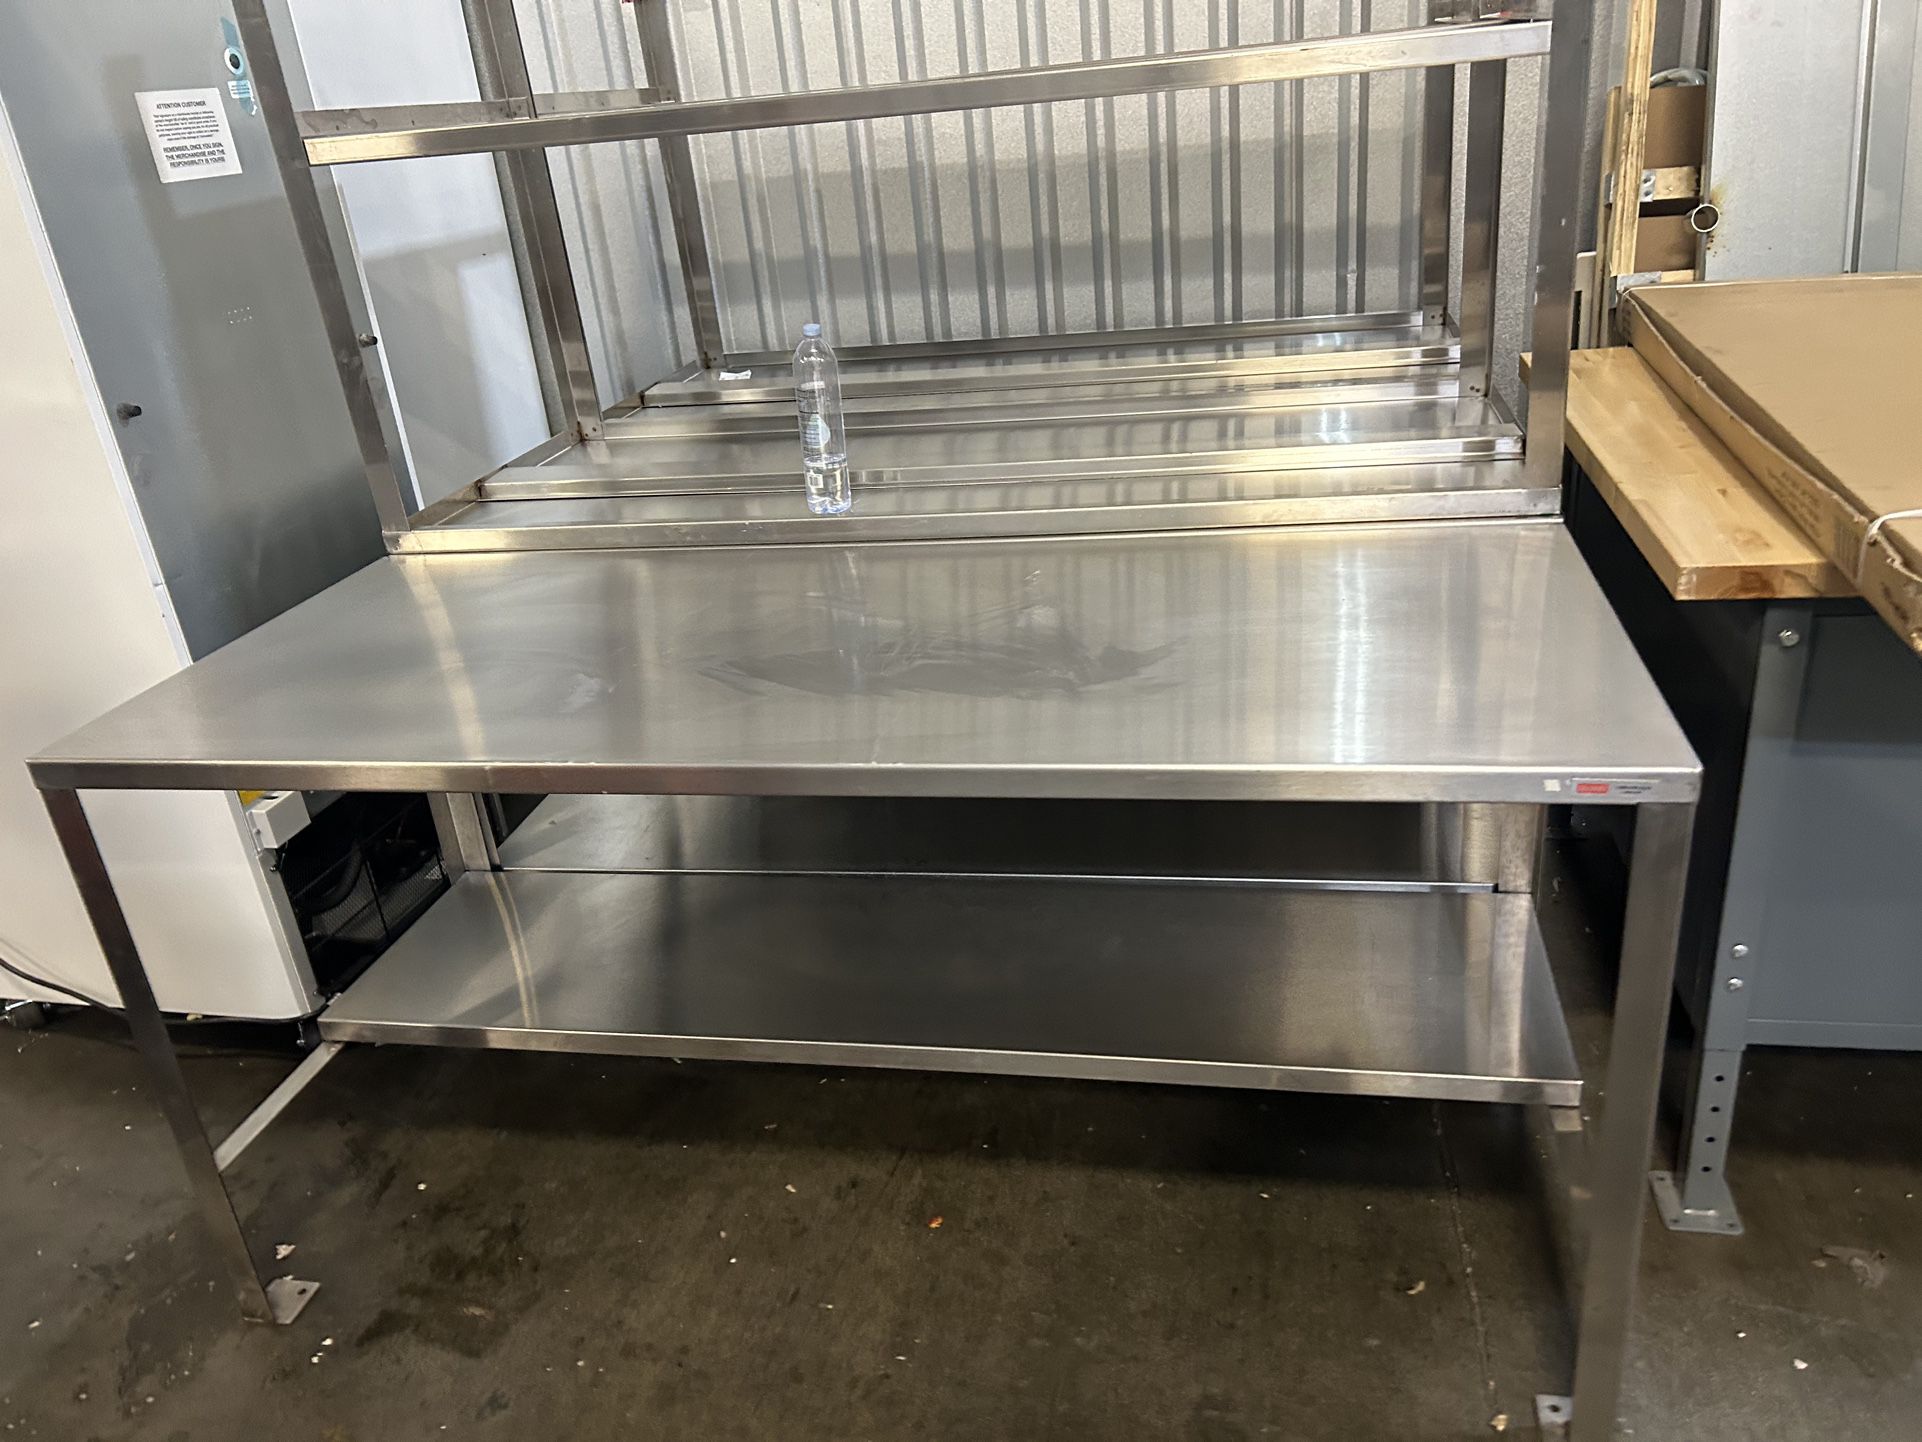 1500lbs Capacity Welded Stainless Steel Work Bench Prep Table Work Table For Factory Warehouse Lab Kitchen Workshop 